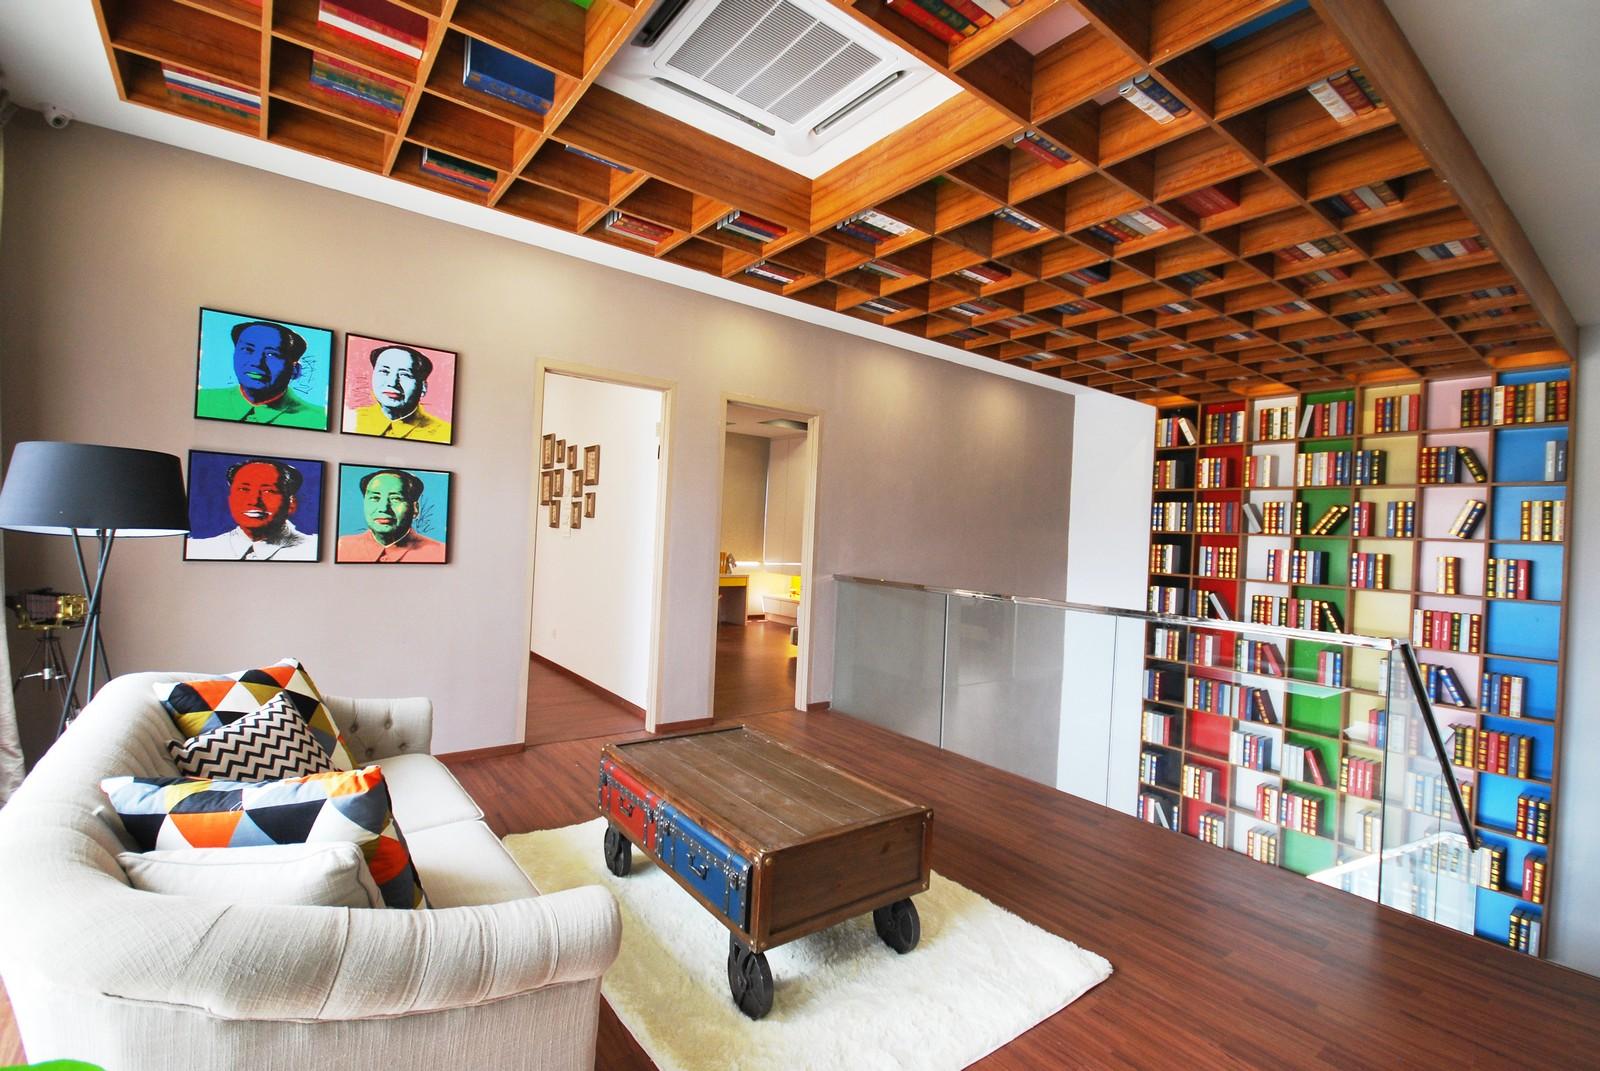 A Colourful, Eclectic Home With A Show-Stopping Bookshelf